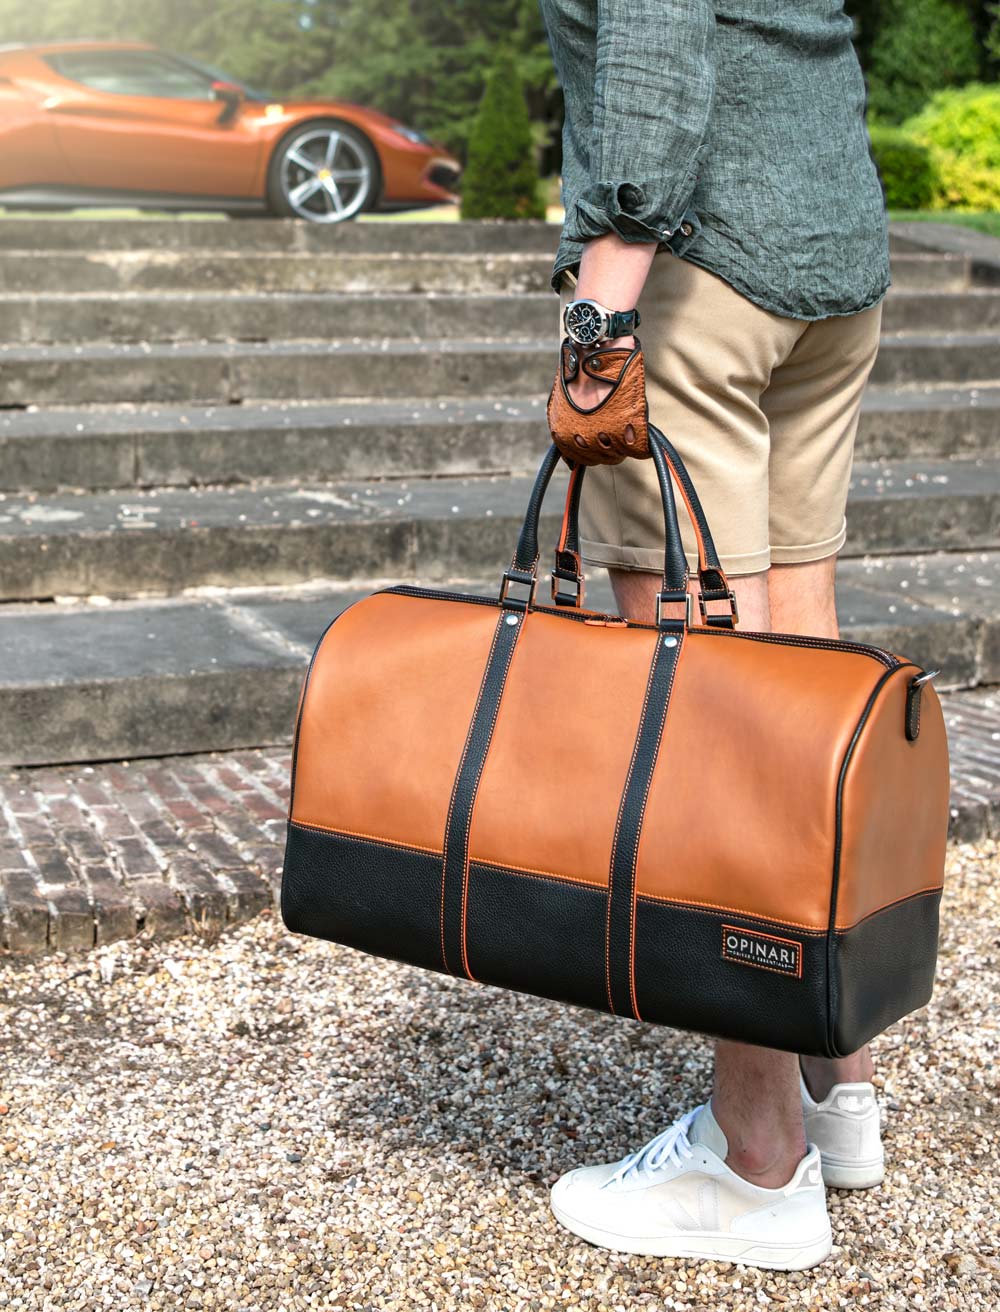 Porsche brown driving gloves and duffle bag